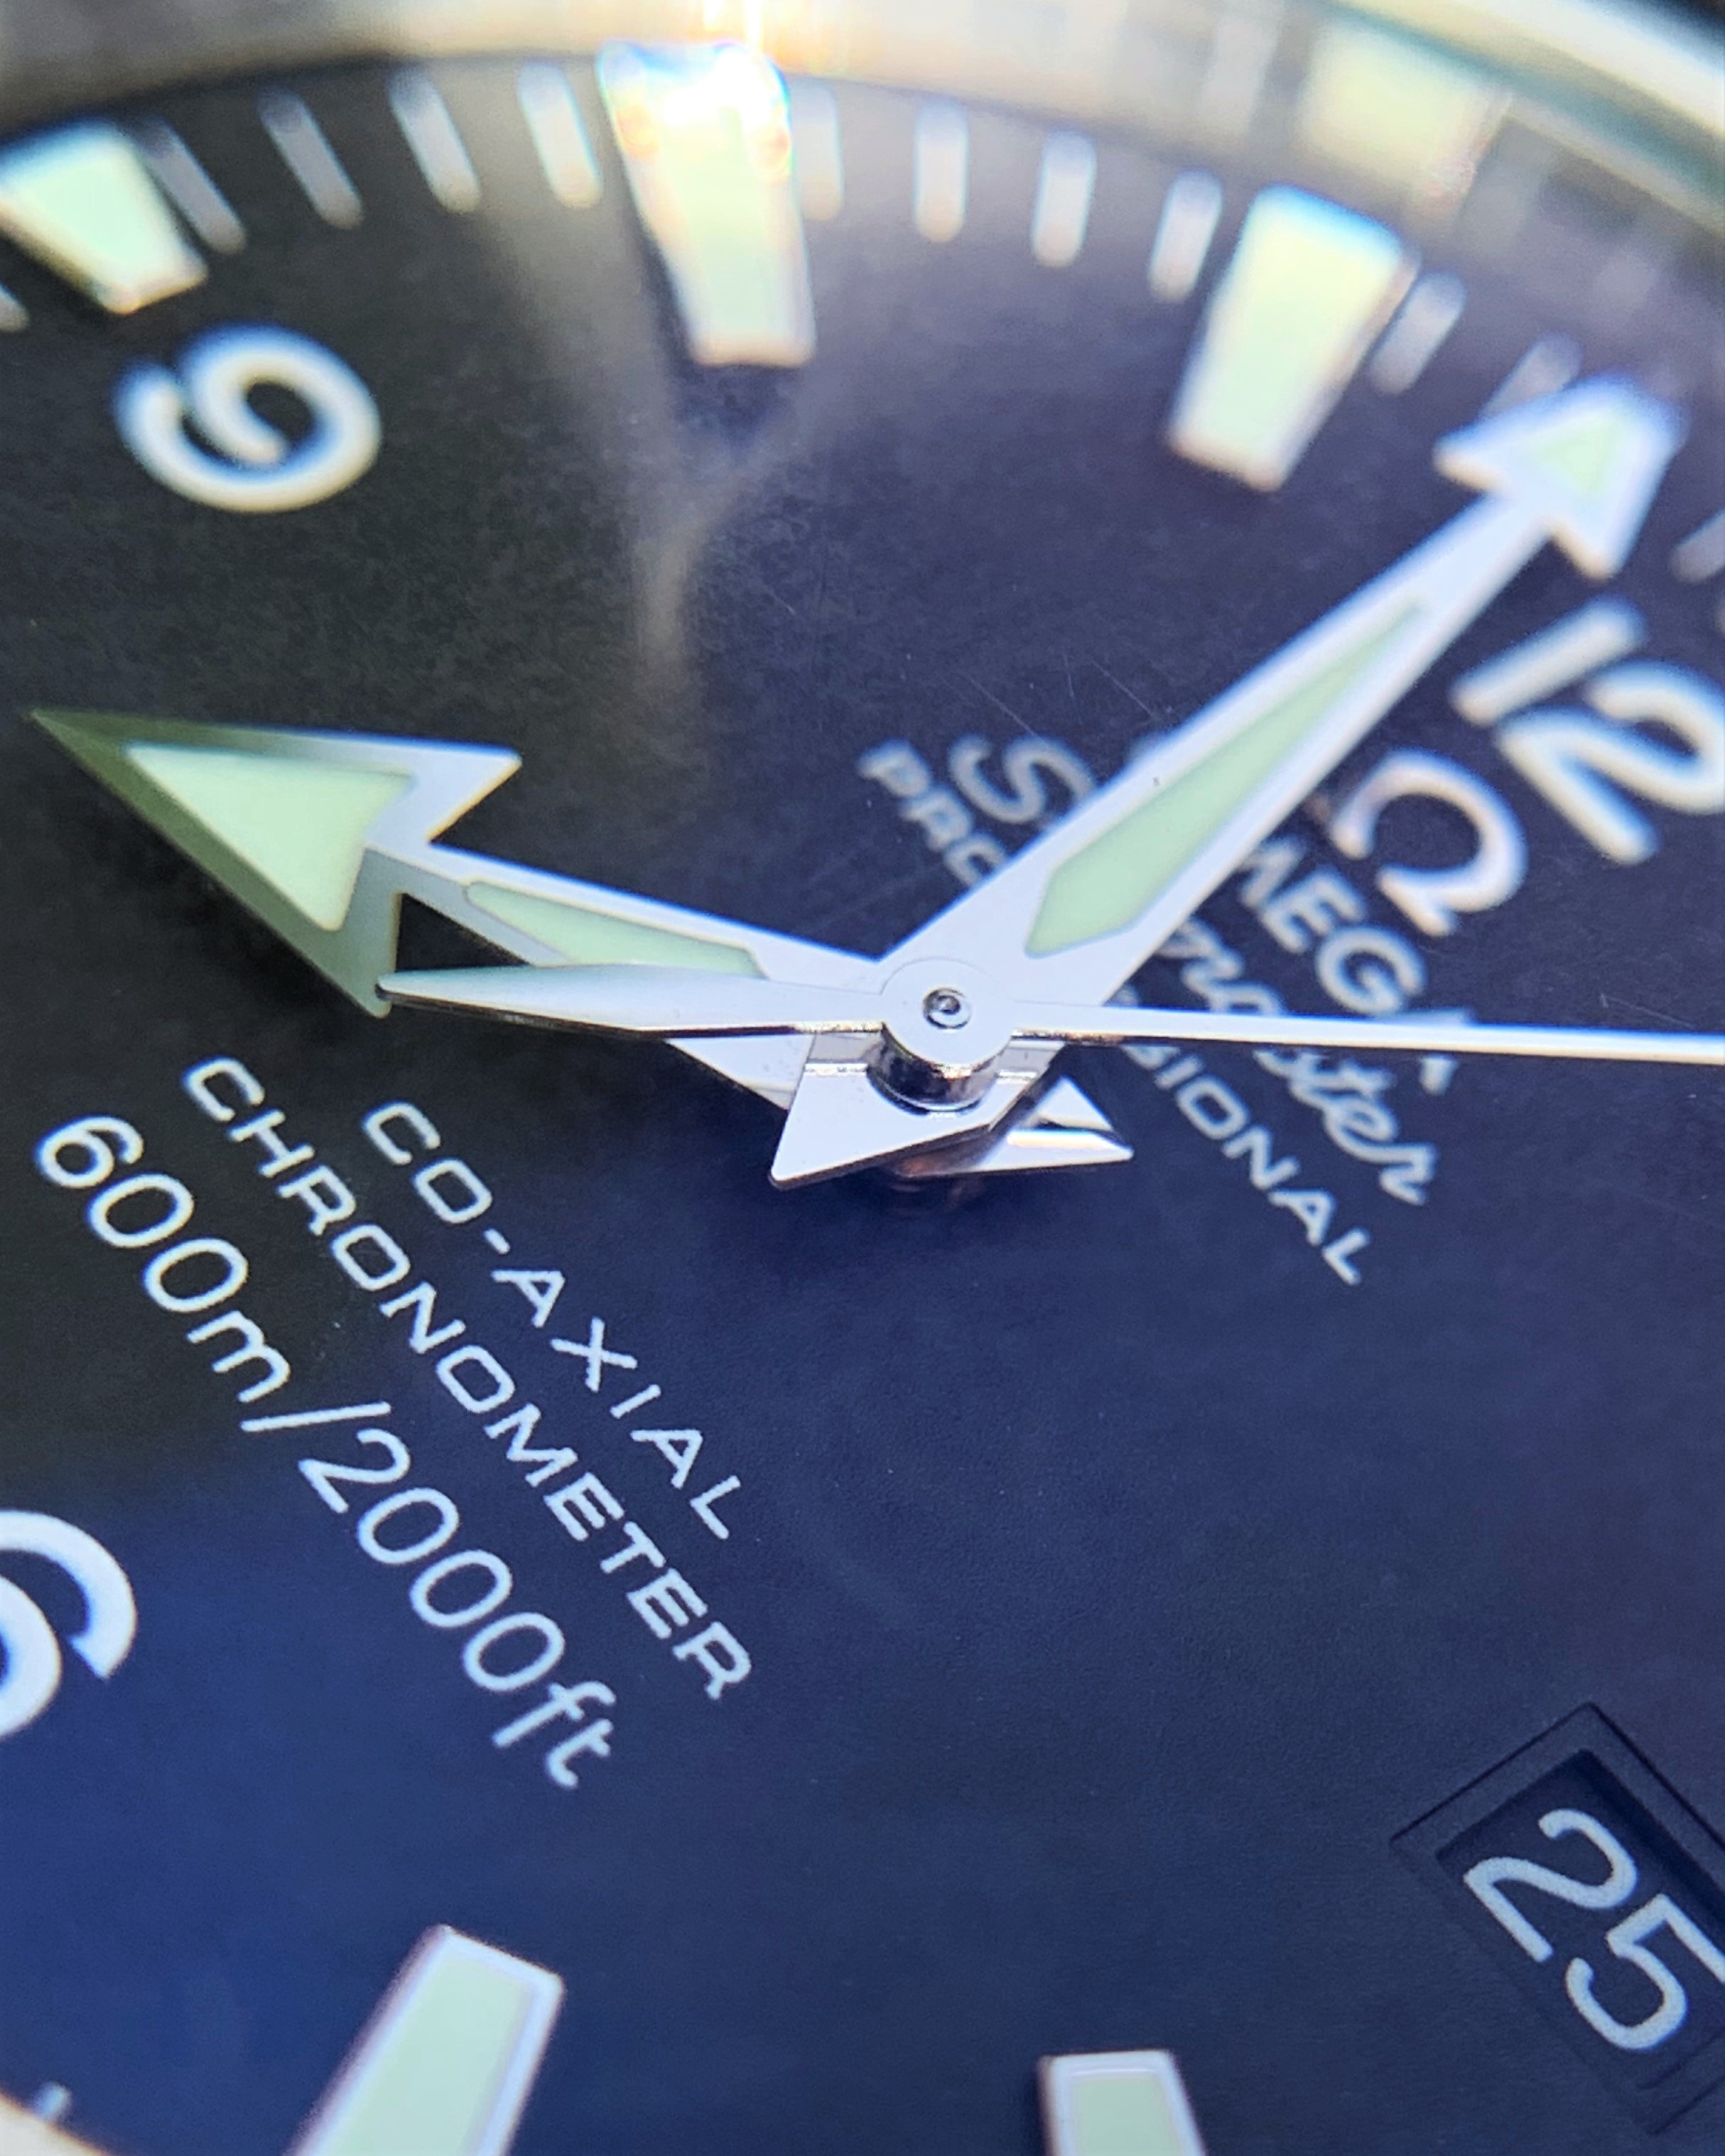 Omega Seamaster with Co-axial escapement